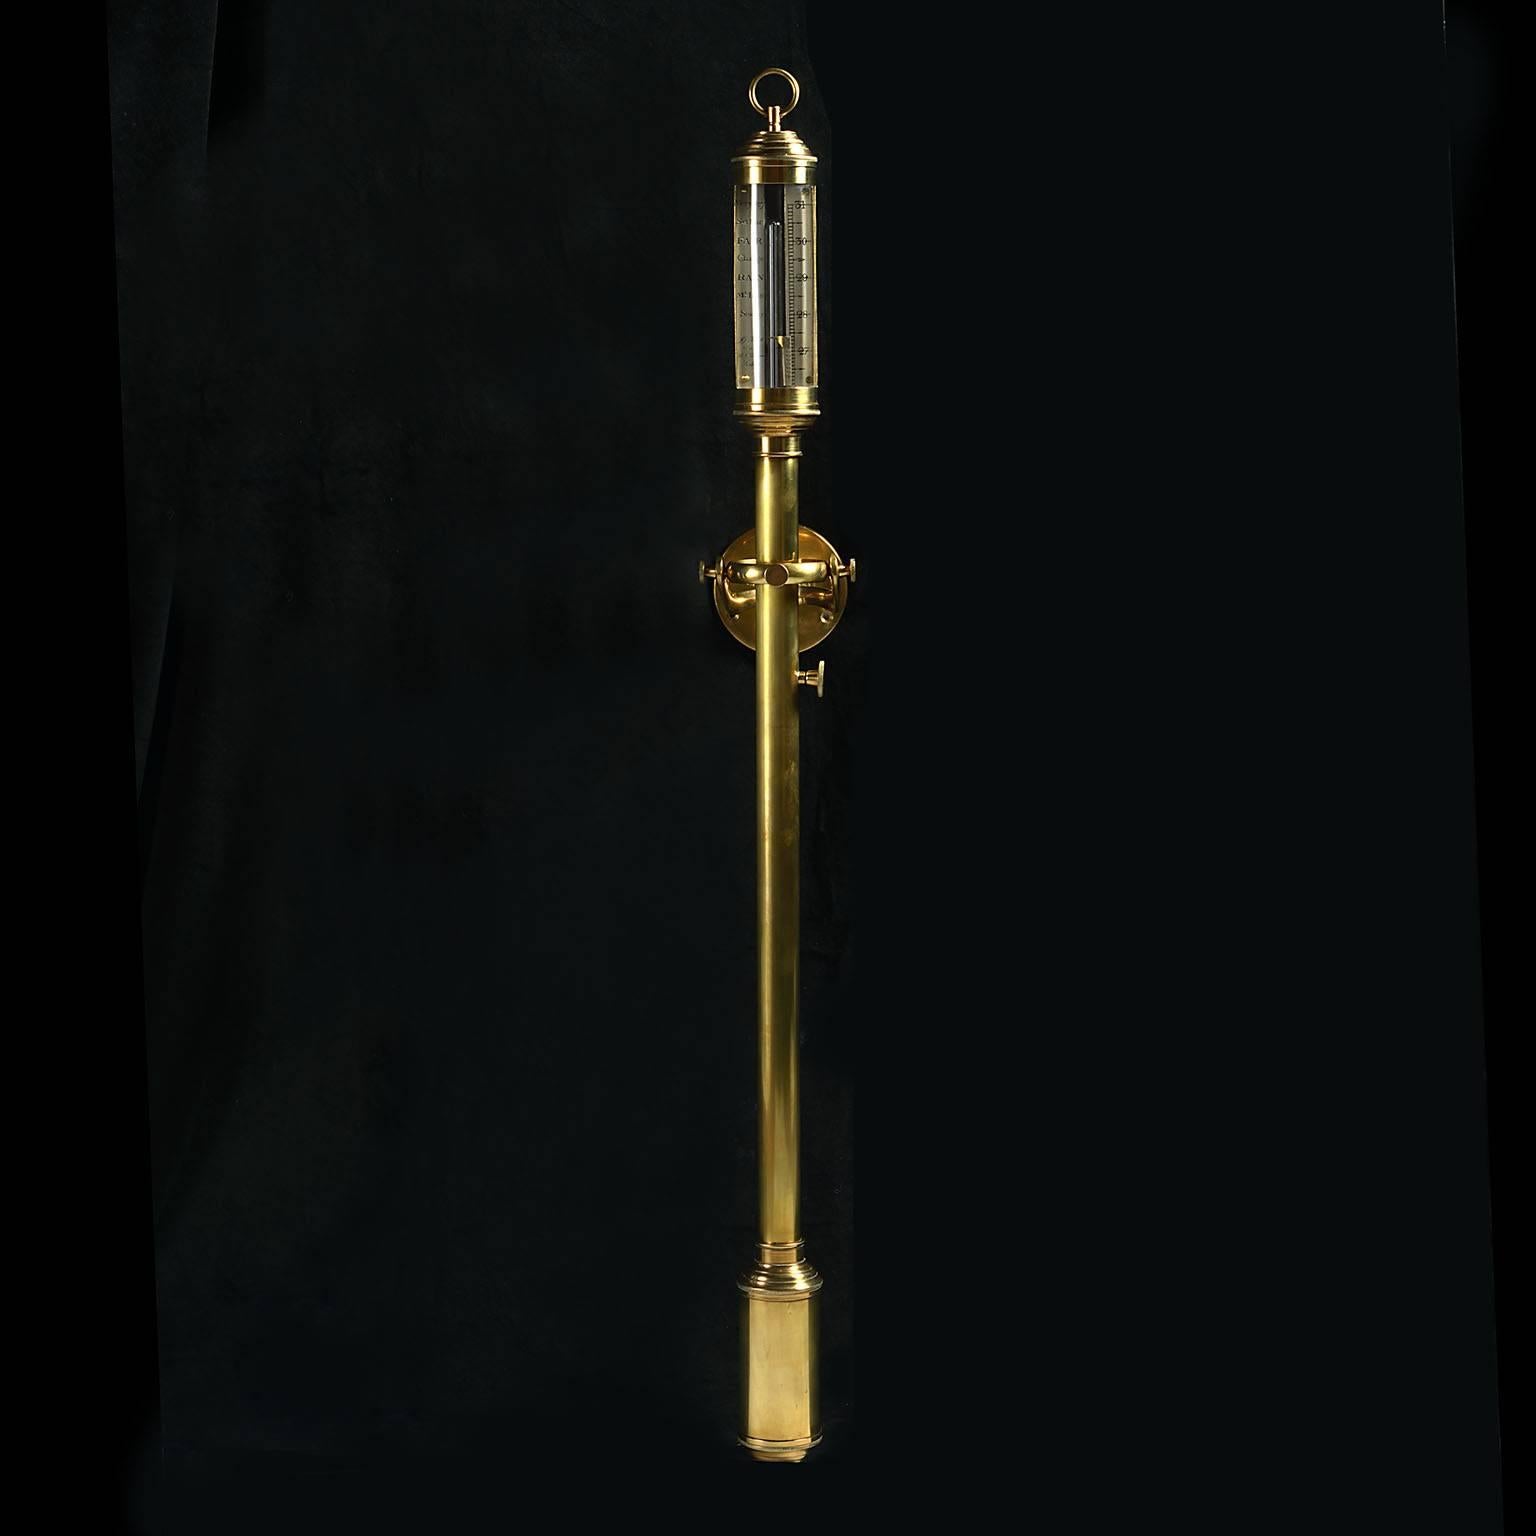 An unusual mid-19th century polished brass marine barometer mounted on a gimble, the steel face signed R.N.Desterre, Lisbon.